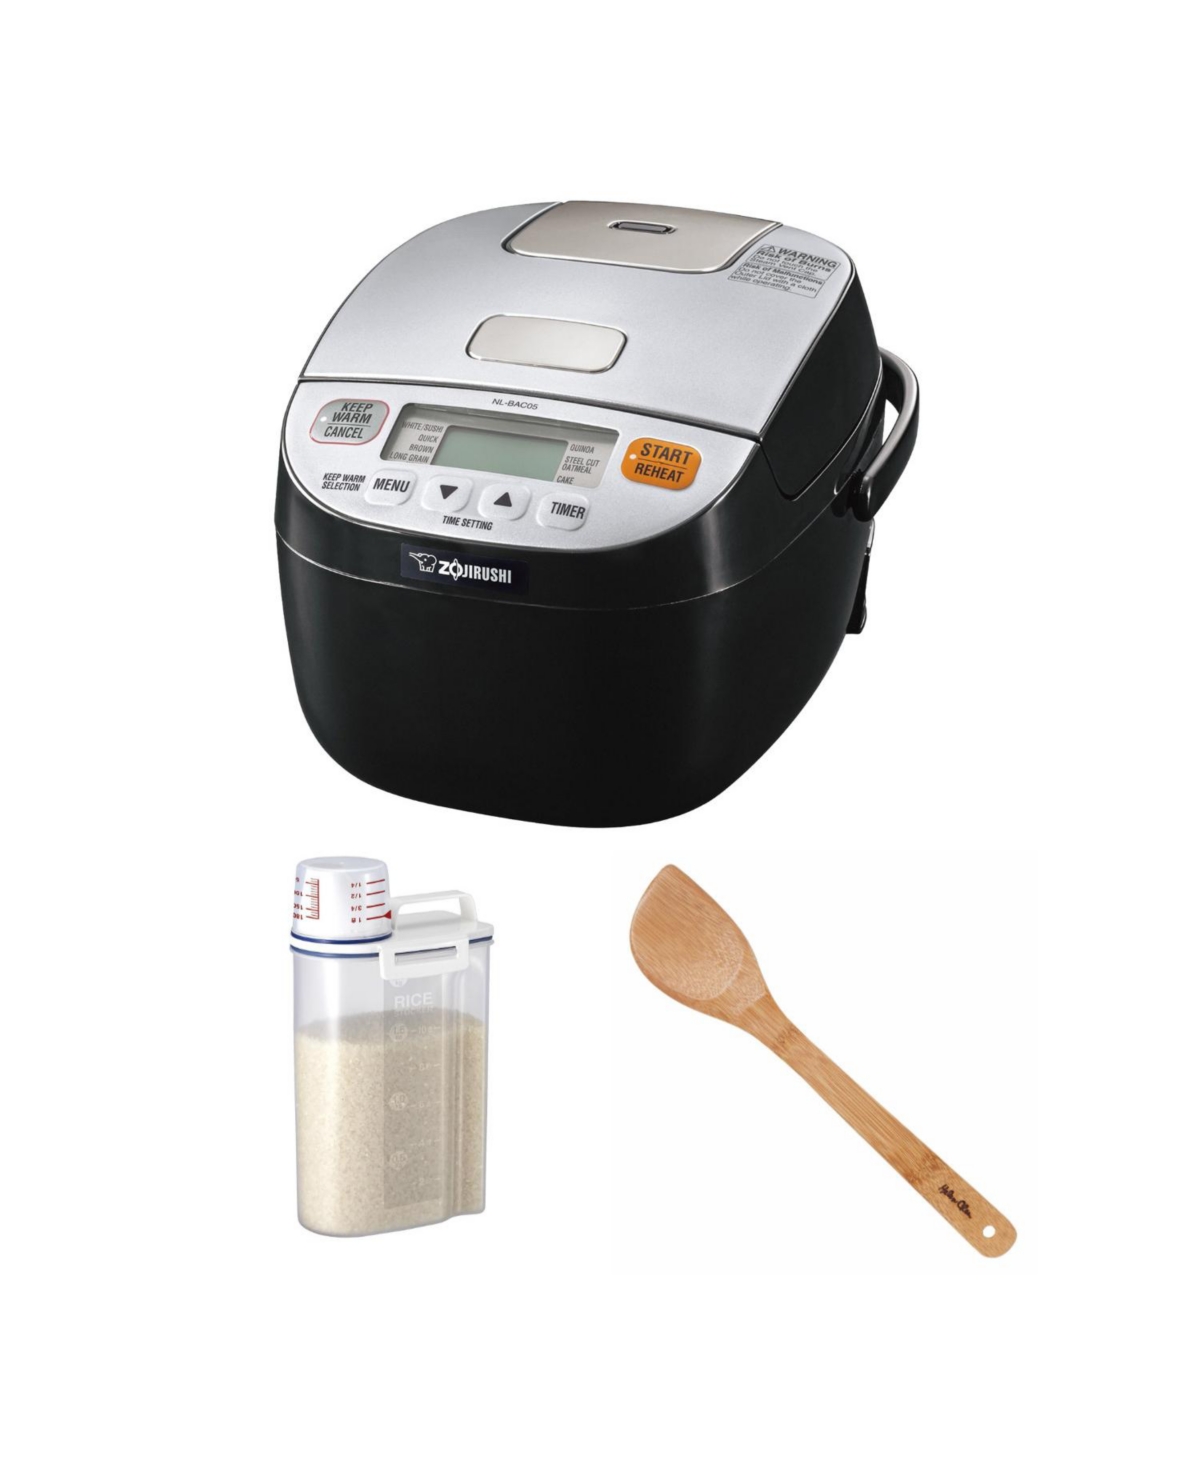 Micom Rice Cooker and Warmer (3-Cup, Silver-Black) with Spatula Bundle - Assorted Pre-Pack